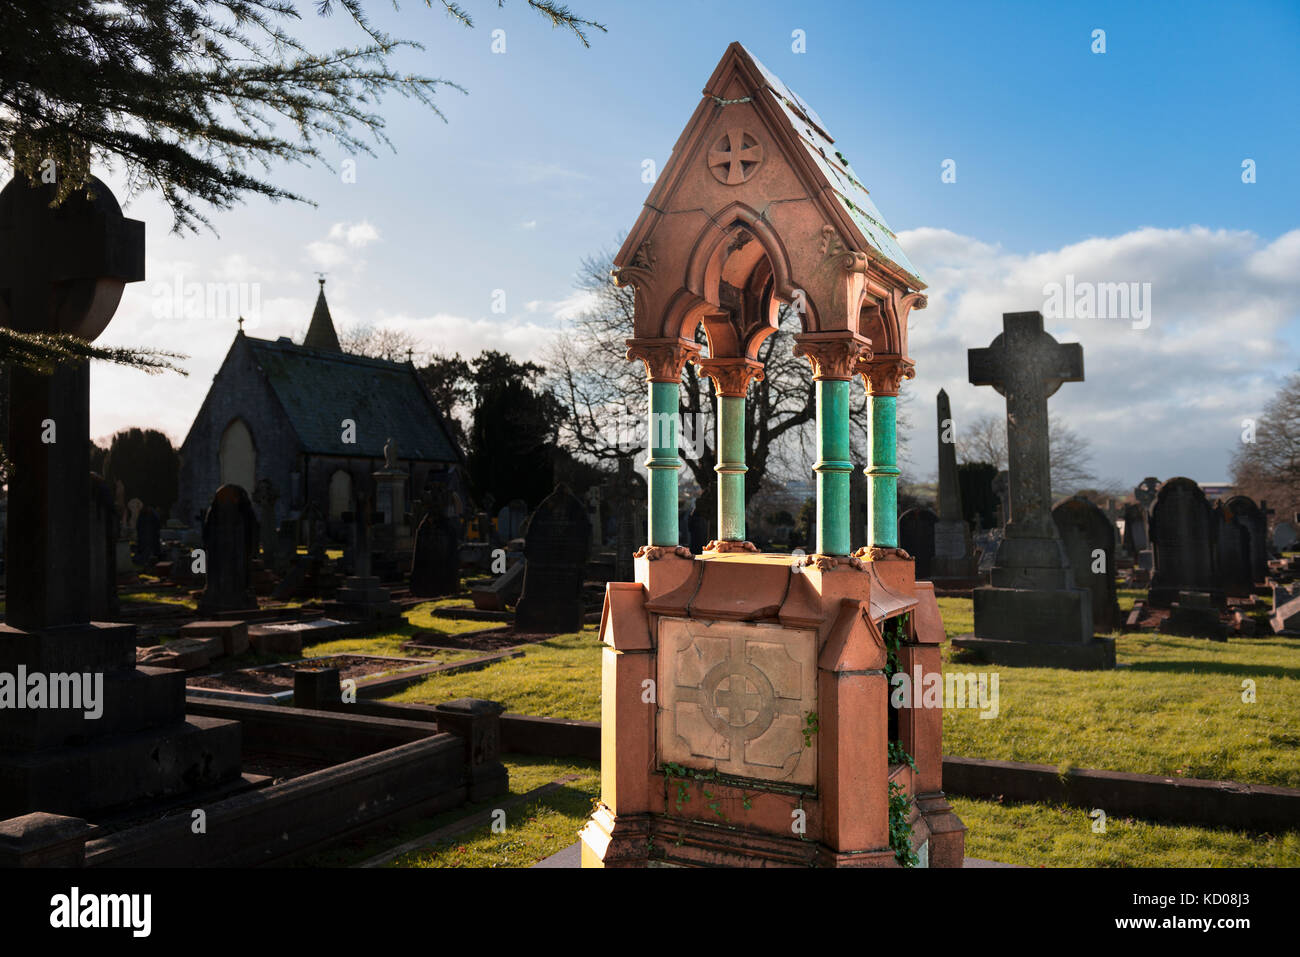 Elaborate and Ornate Victorian grave monument with raised plinth, columns and pitched roof. Polished granite memorial. Sunny winter scene with chapel Stock Photo